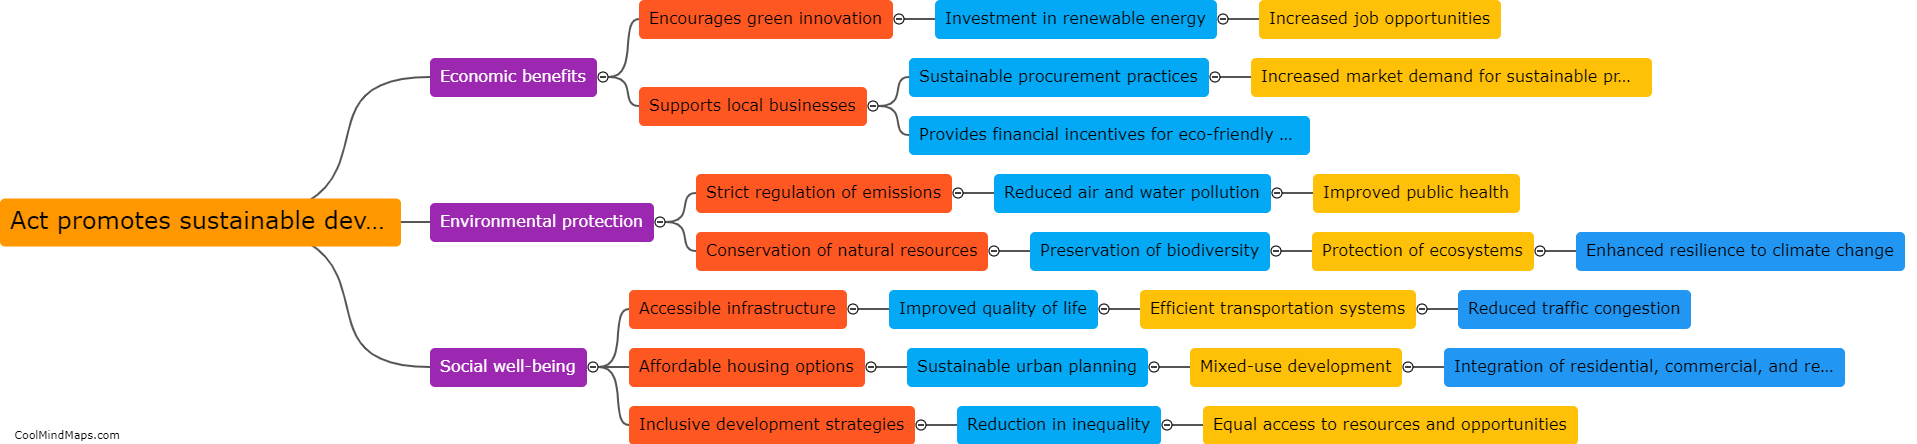 How does the act promote sustainable development practices?